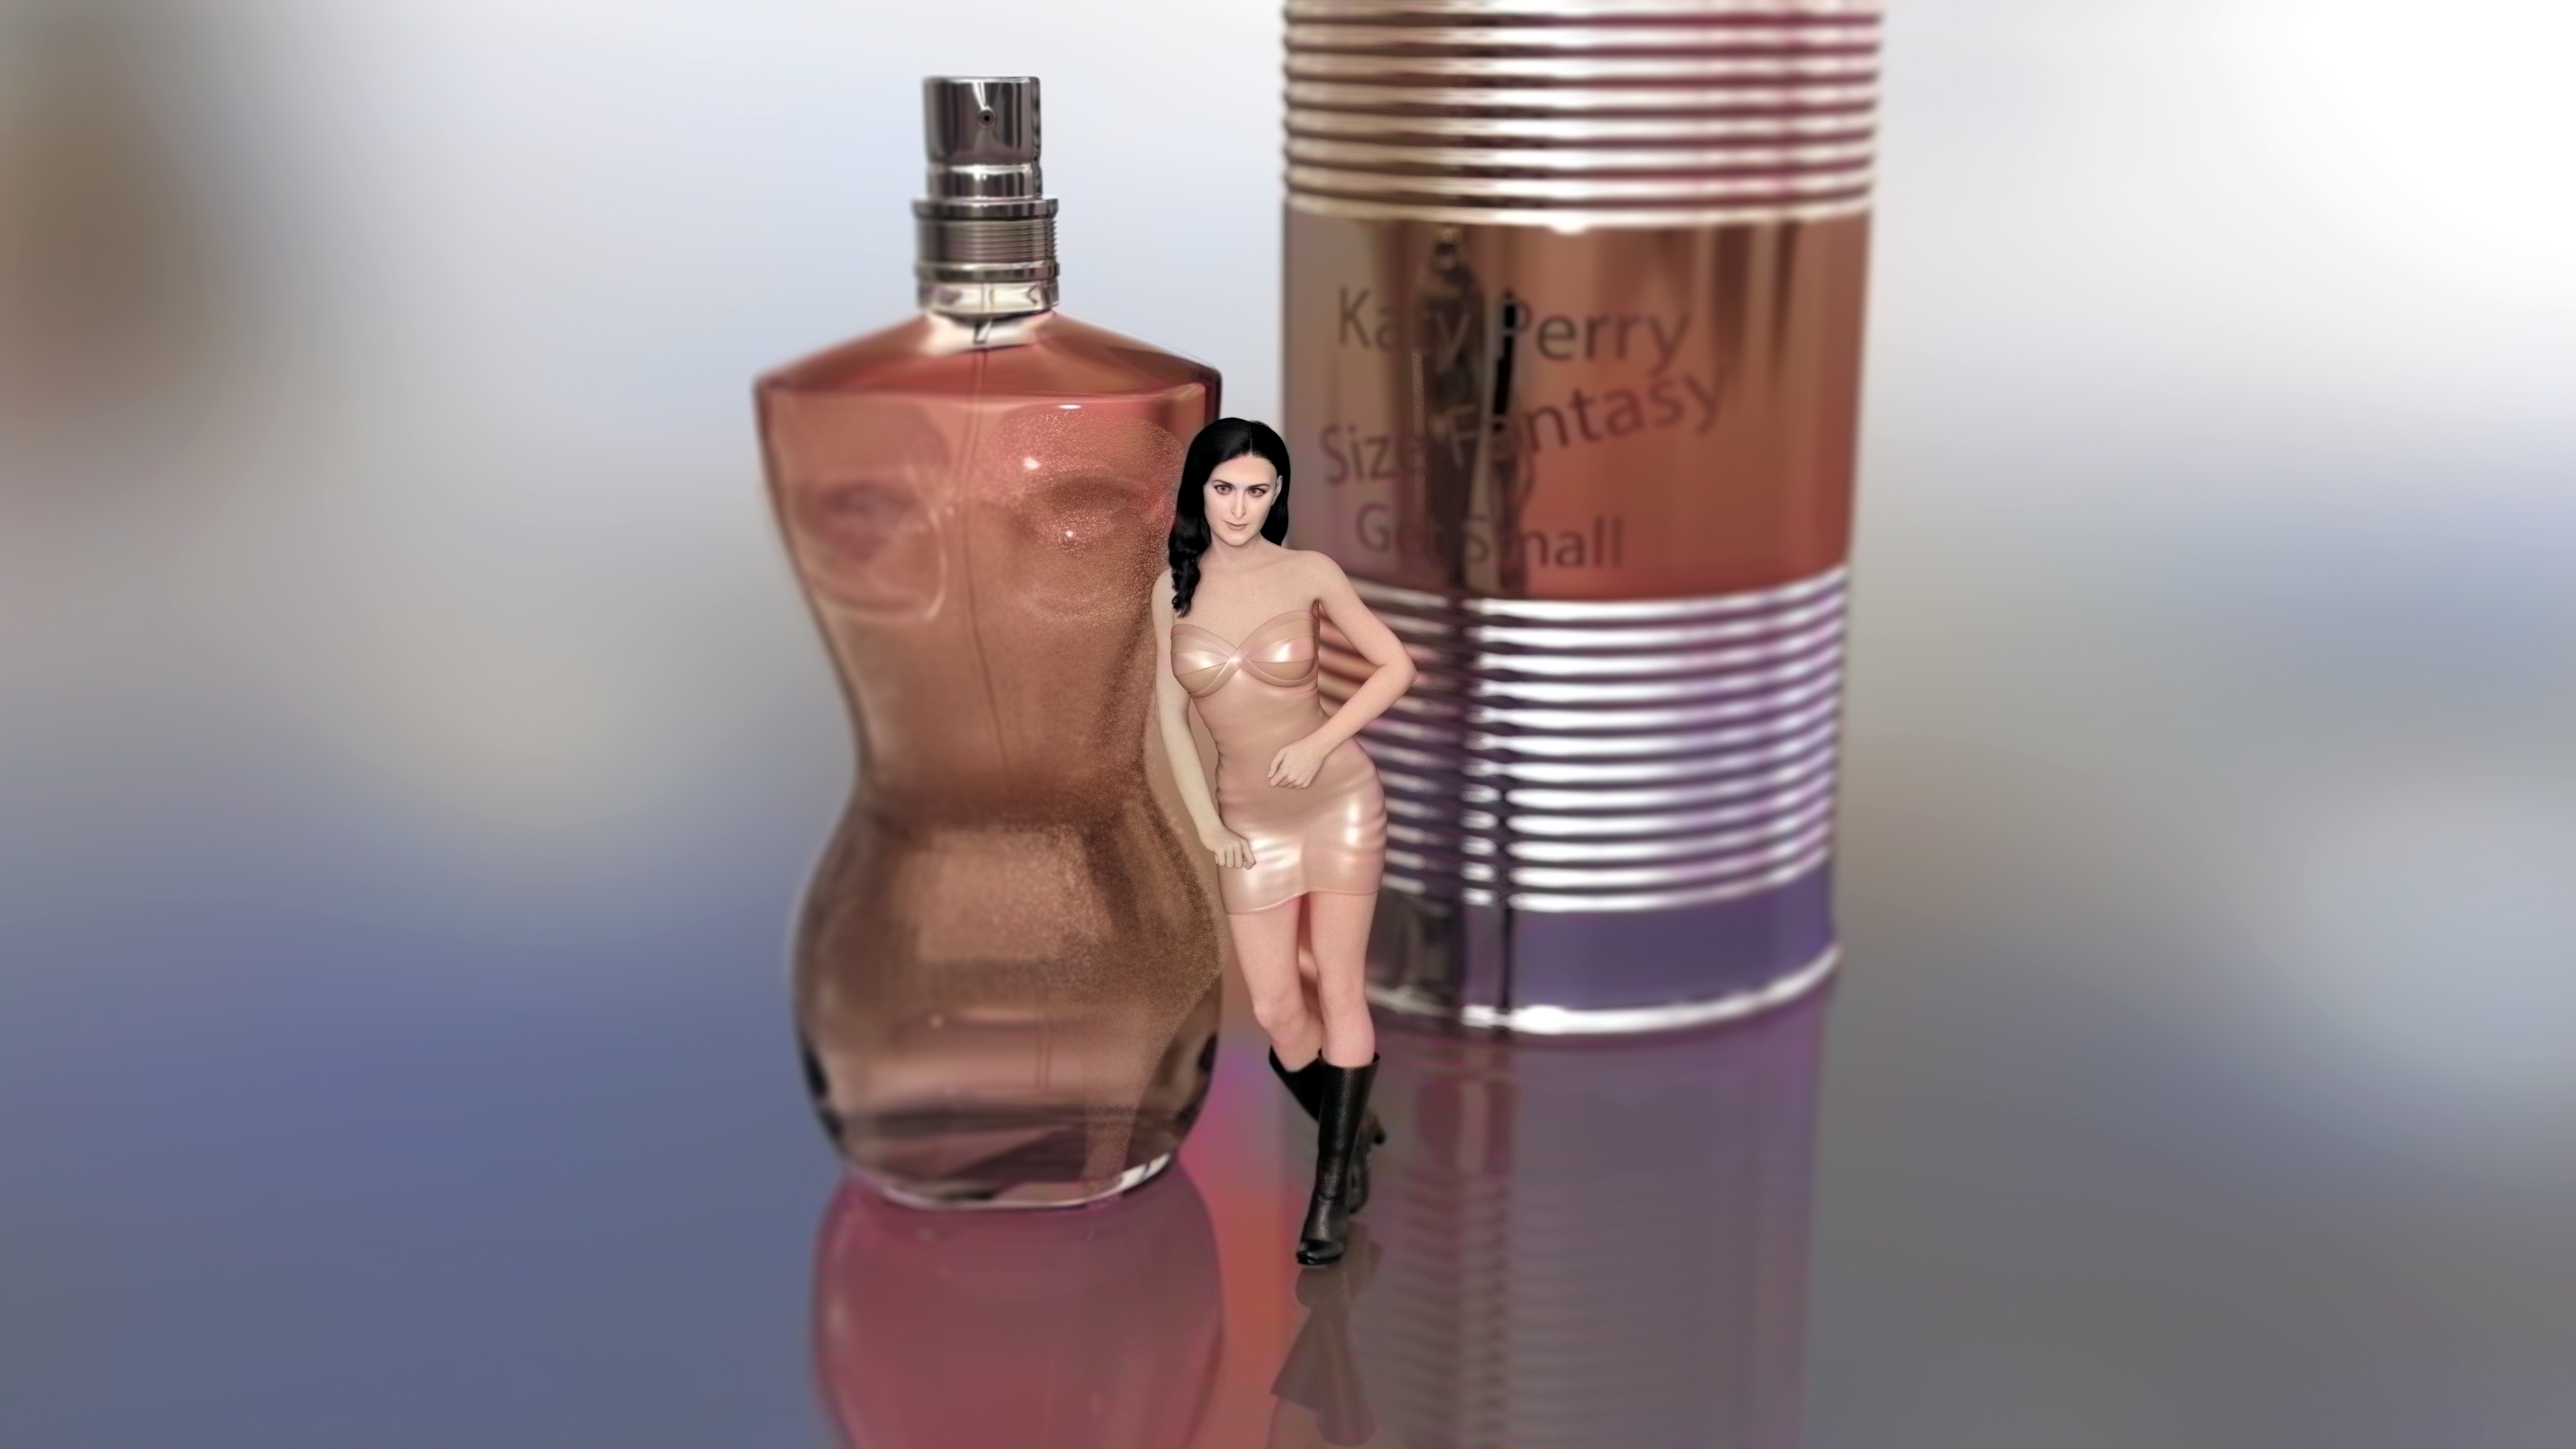 Katy Perry's new advertising campaign for her shrink-you perfume.jpg